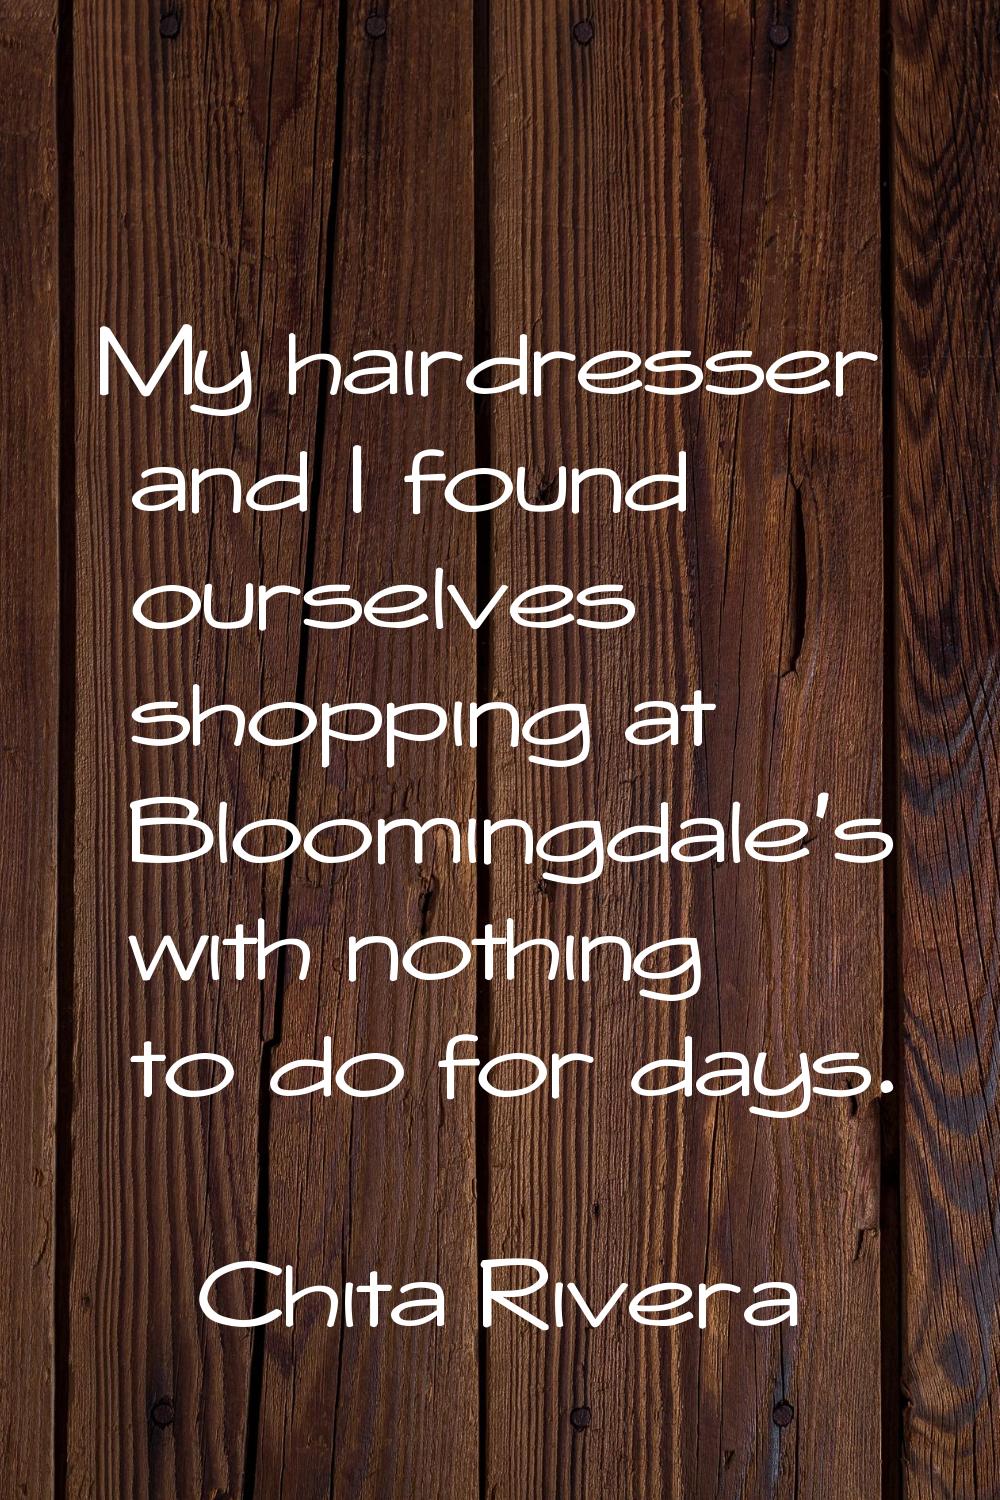 My hairdresser and I found ourselves shopping at Bloomingdale's with nothing to do for days.